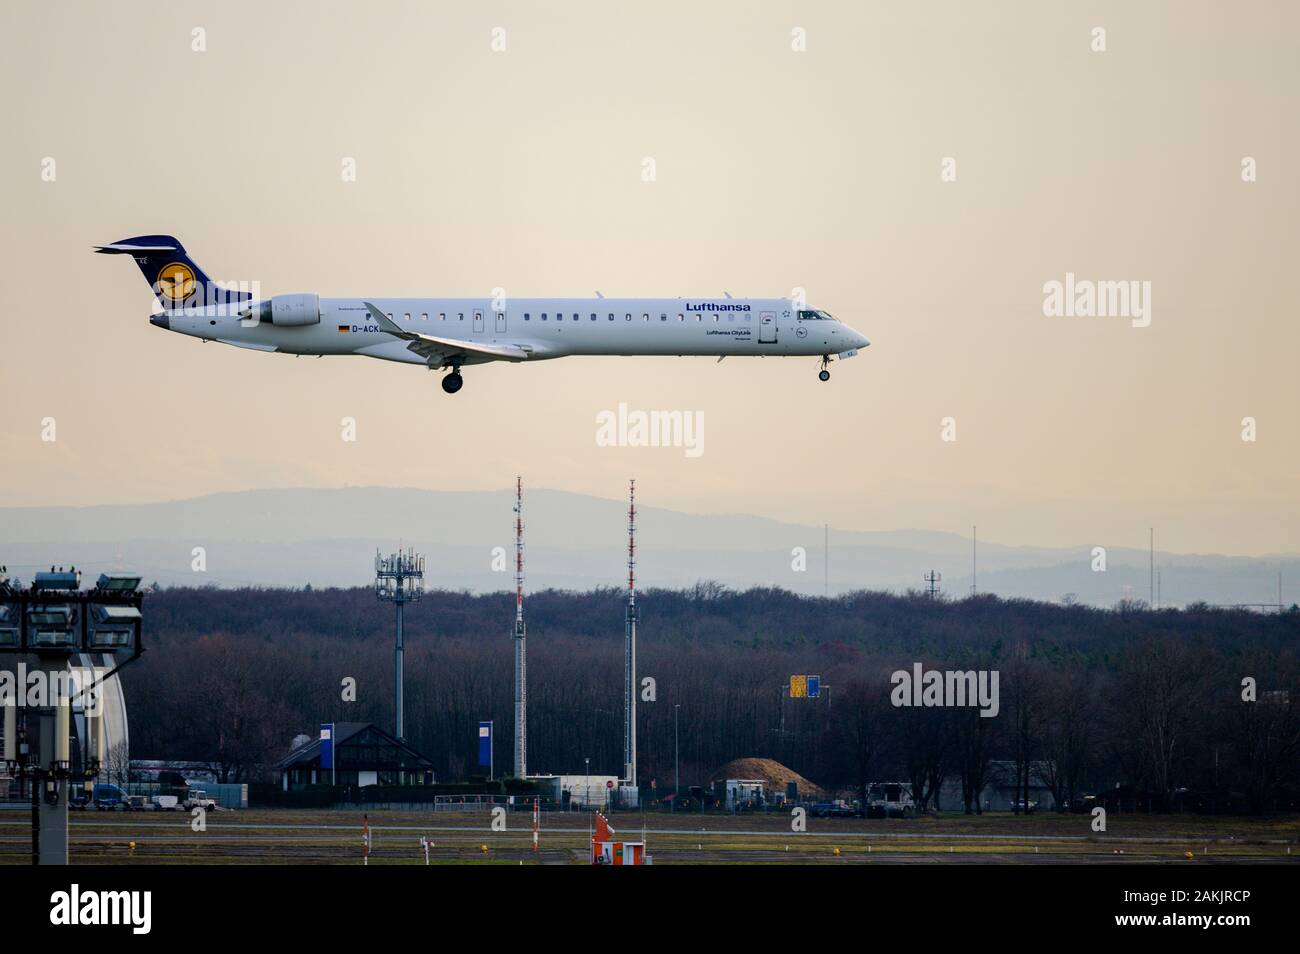 Lufthansa Cityline Bombardier CRJ 700 aircraft coming in to land at Frankfurt airport in Germany at sunset Stock Photo